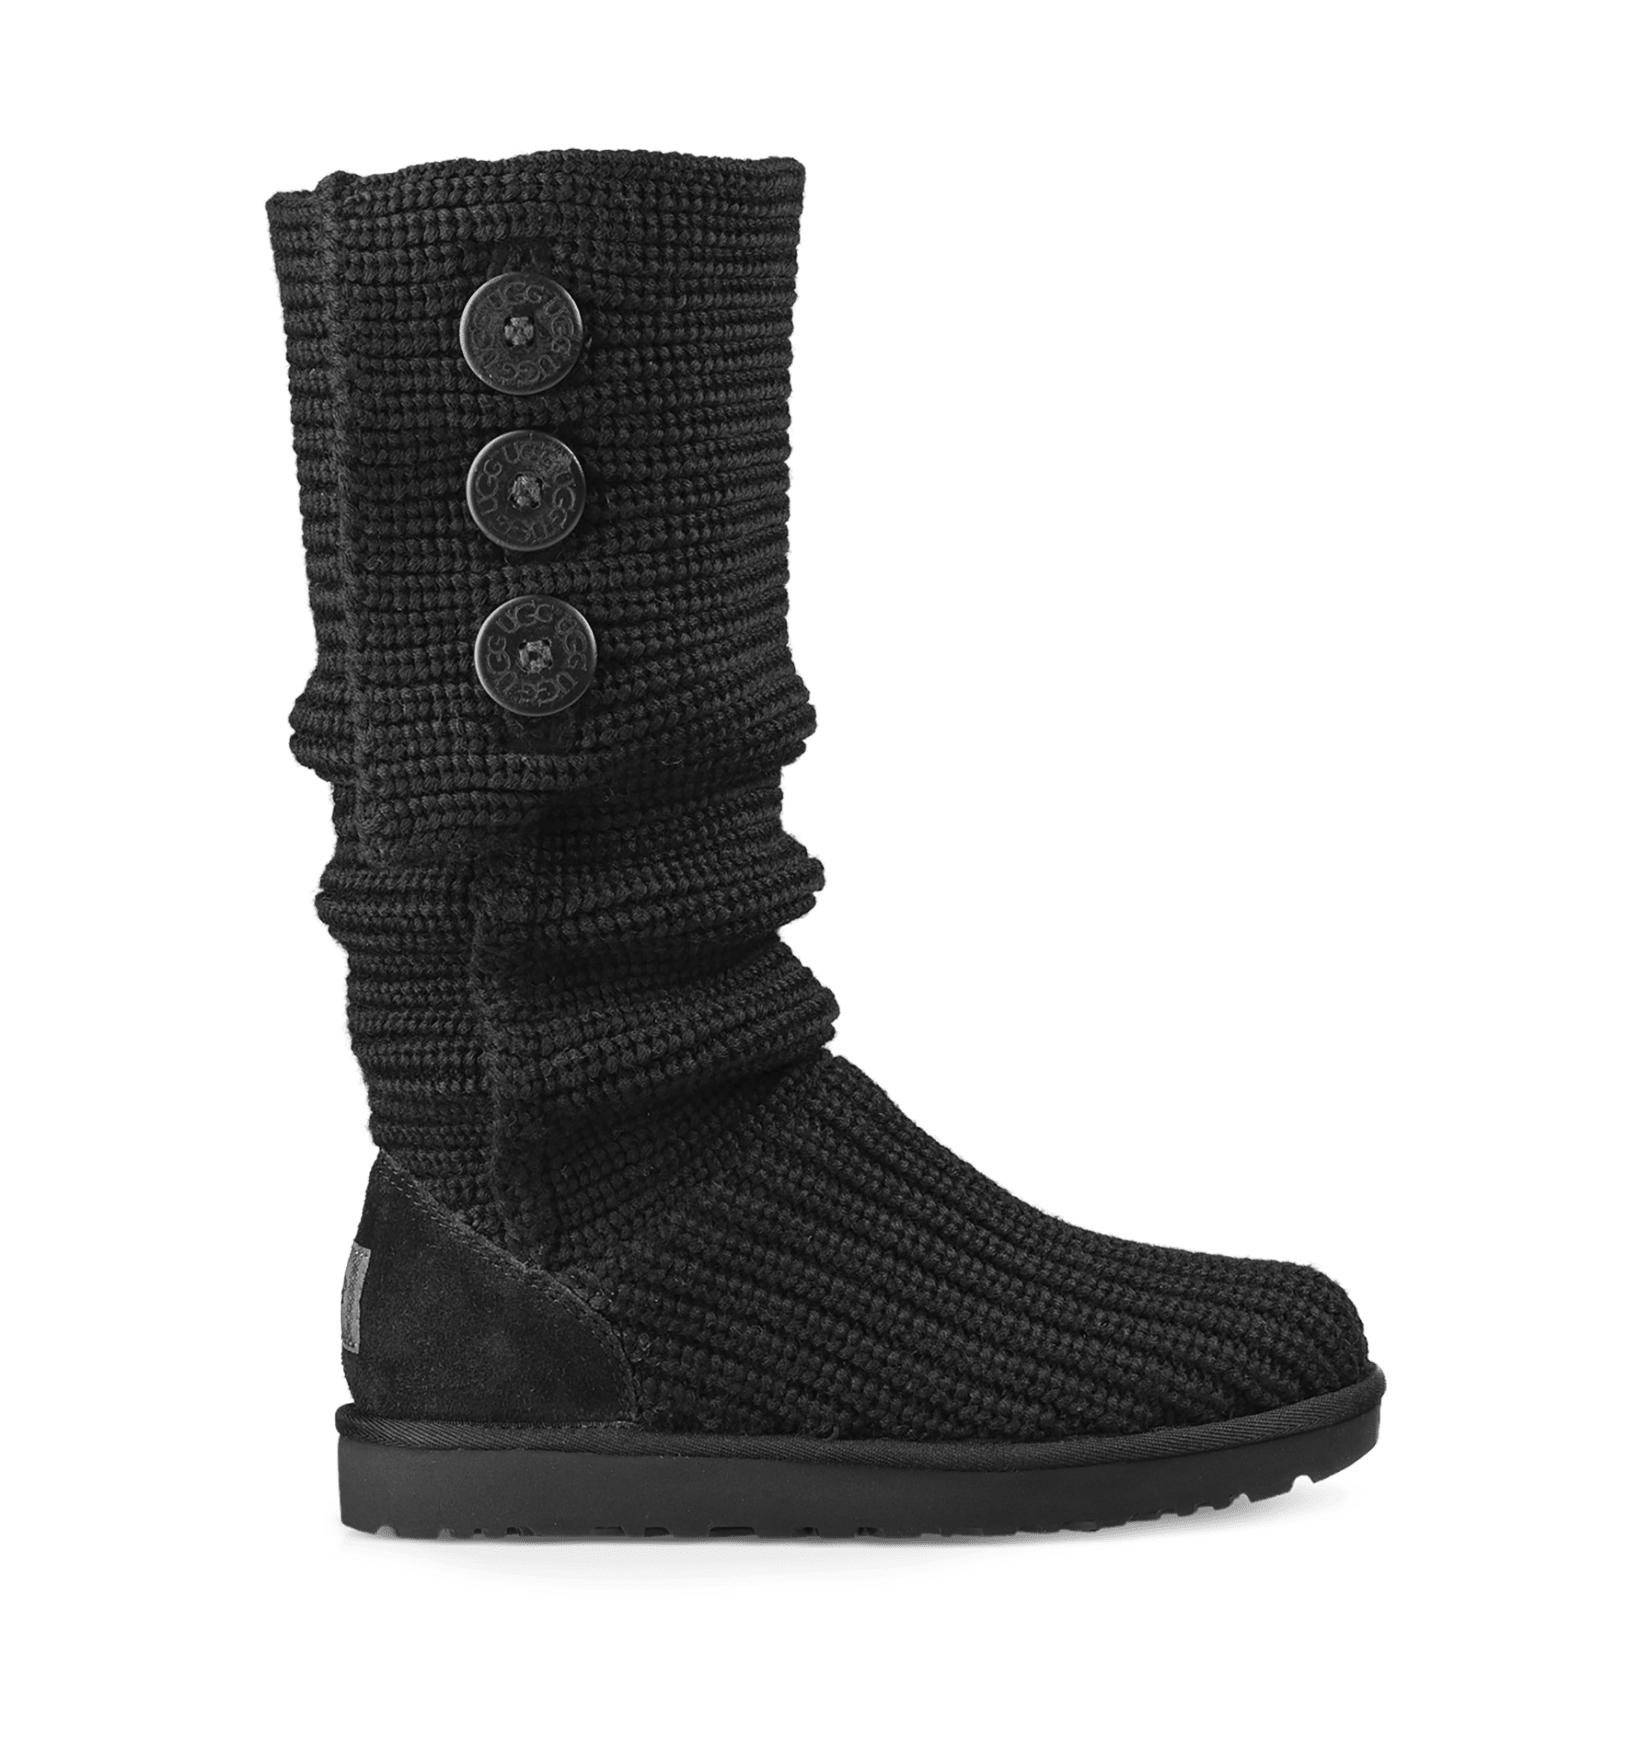 Post impressionisme transactie is genoeg Classic UGG Cardy Boots | UGG® Official